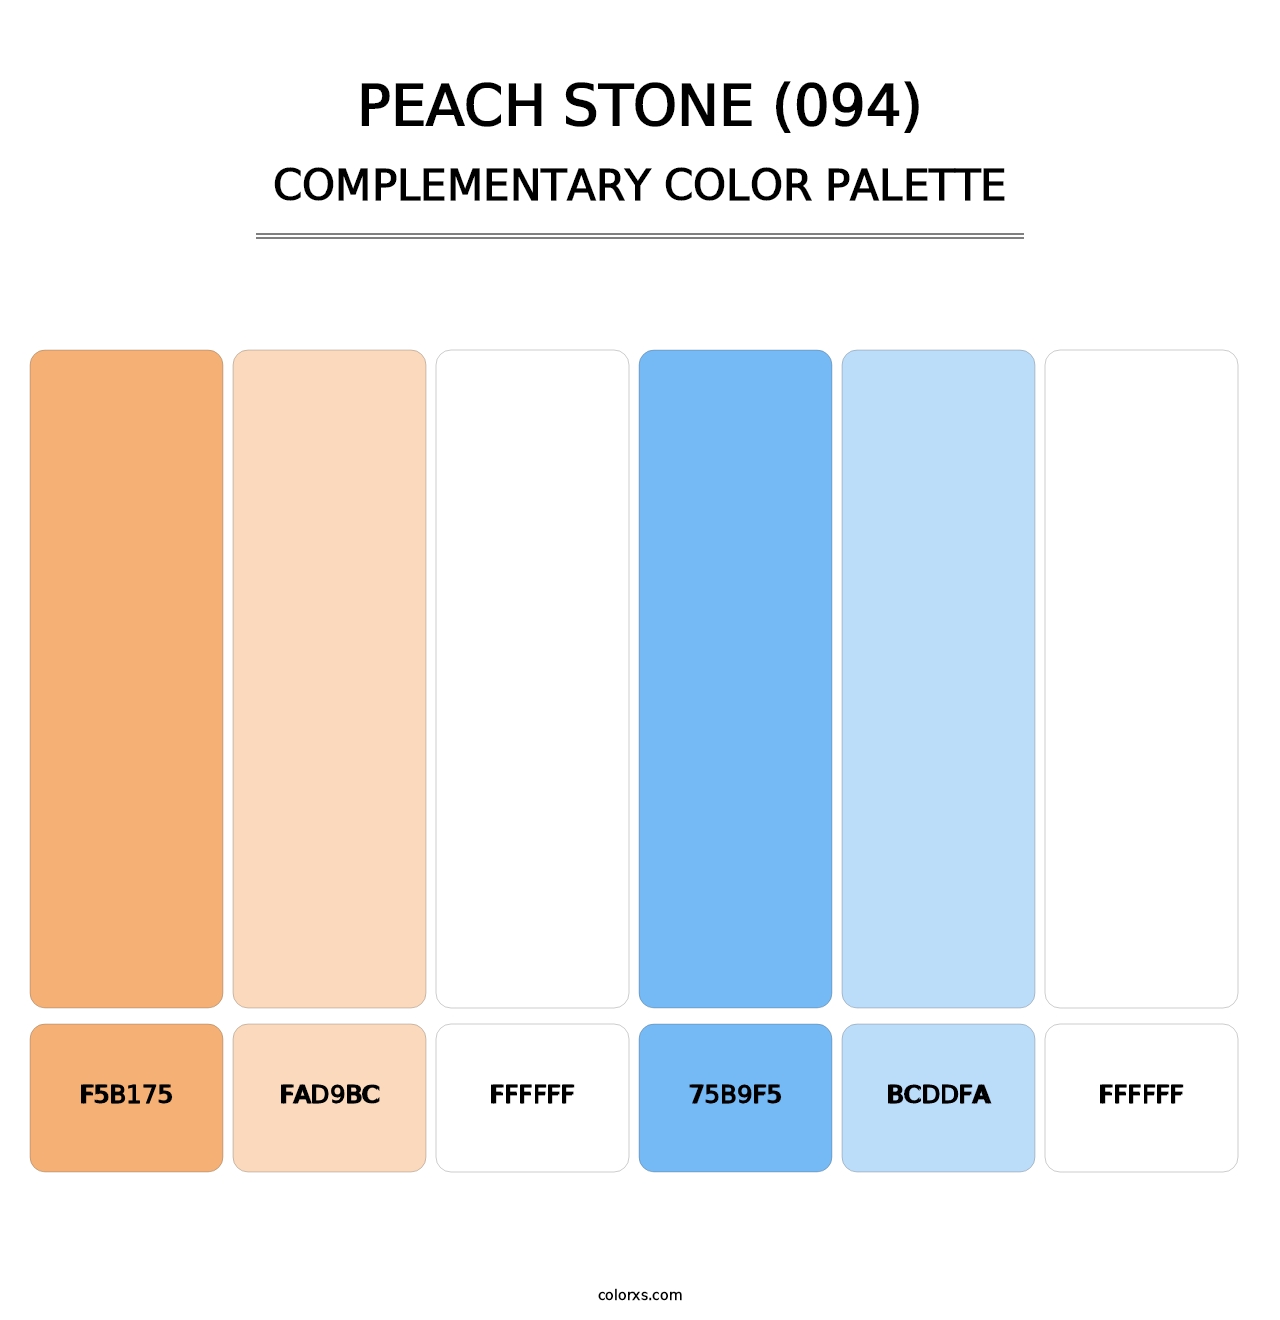 Peach Stone (094) - Complementary Color Palette